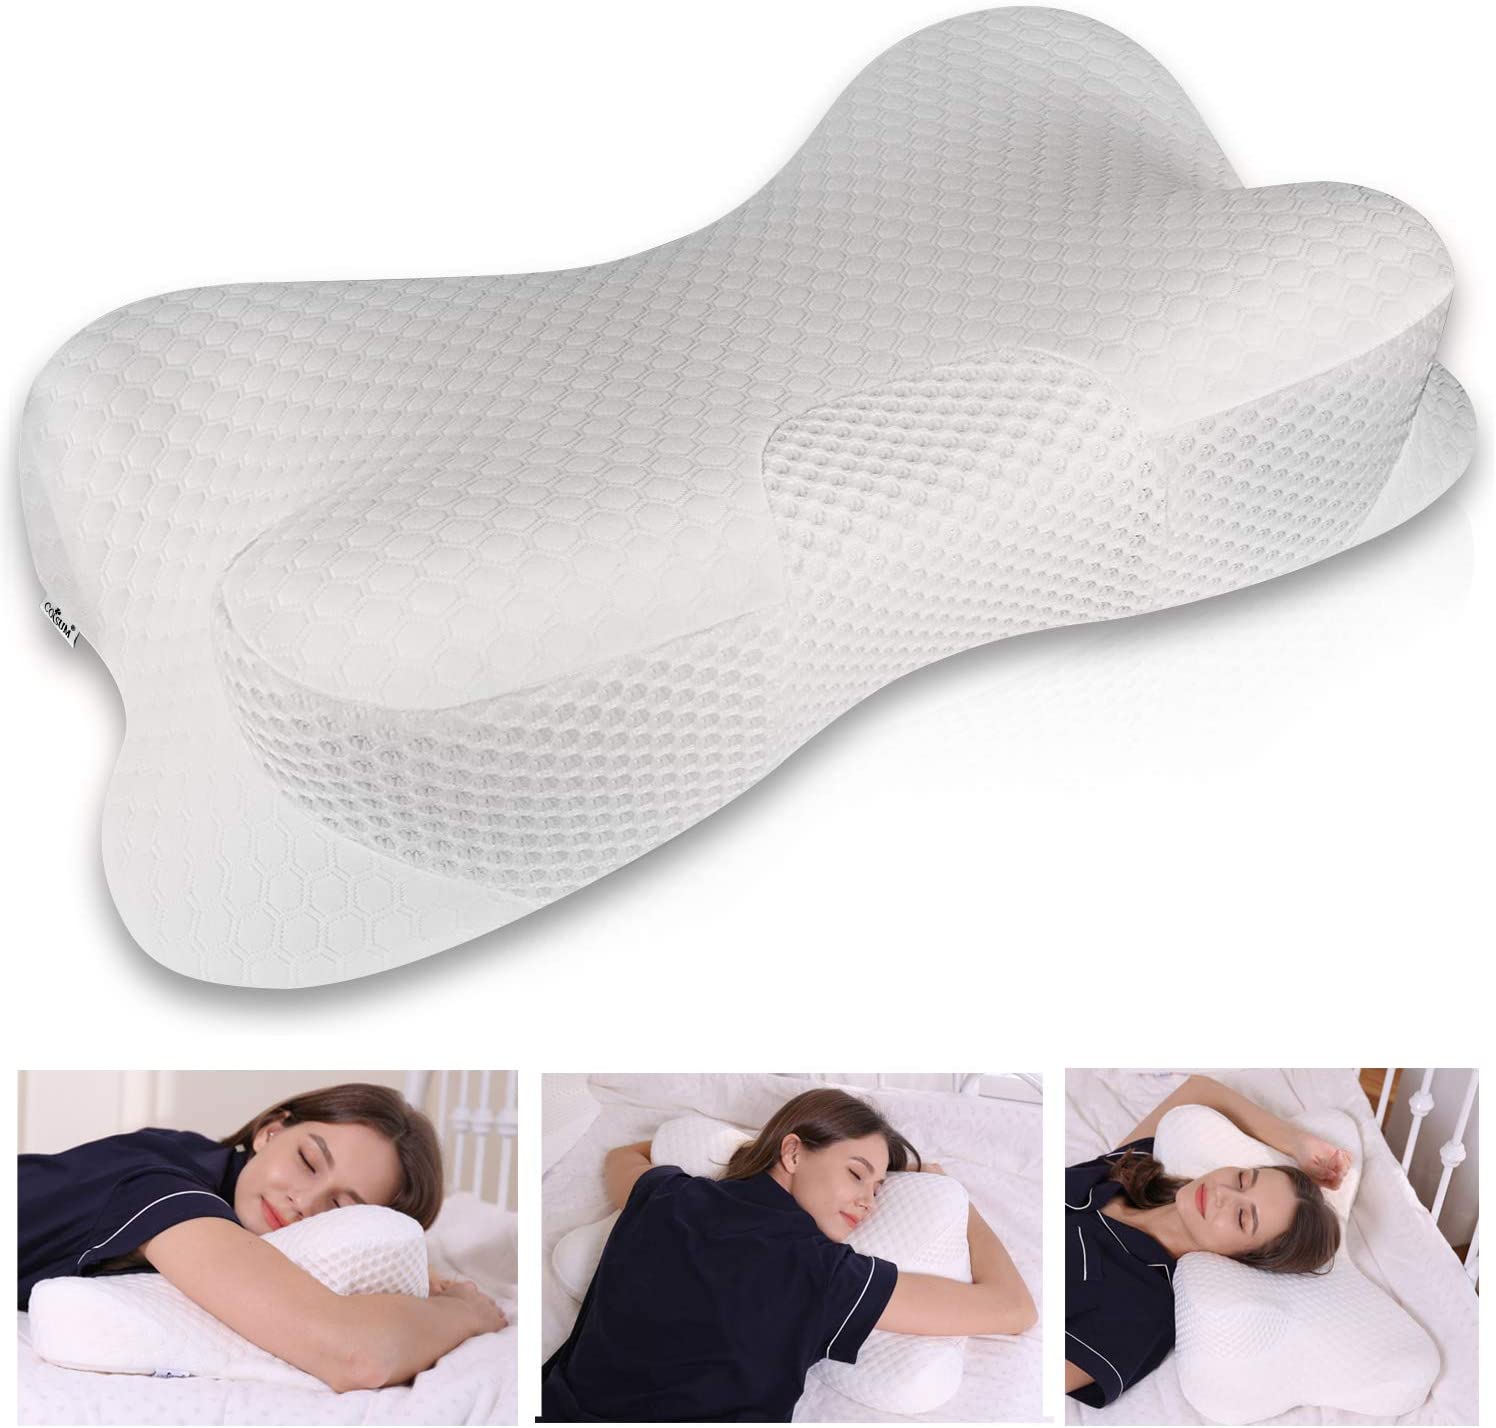 Best Down Pillow For Stomach Sleepers Reviews 2020